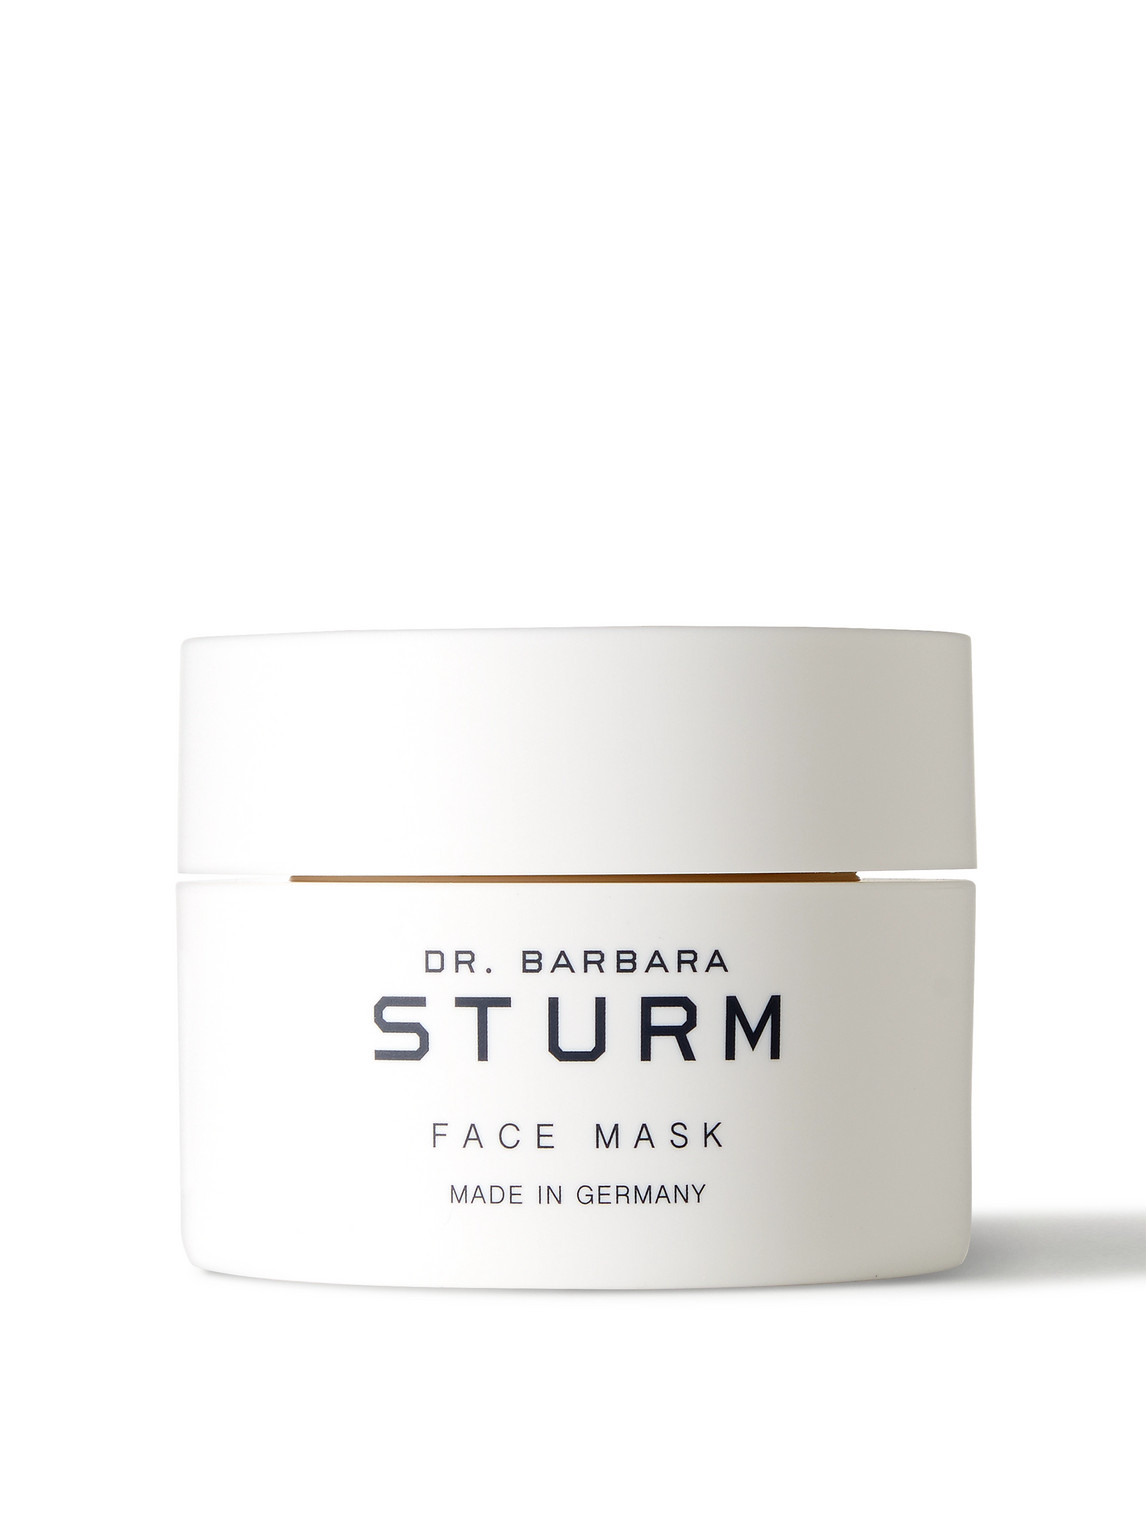 Dr Barbara Sturm Deep Hydrating Mask, 50ml In Colorless